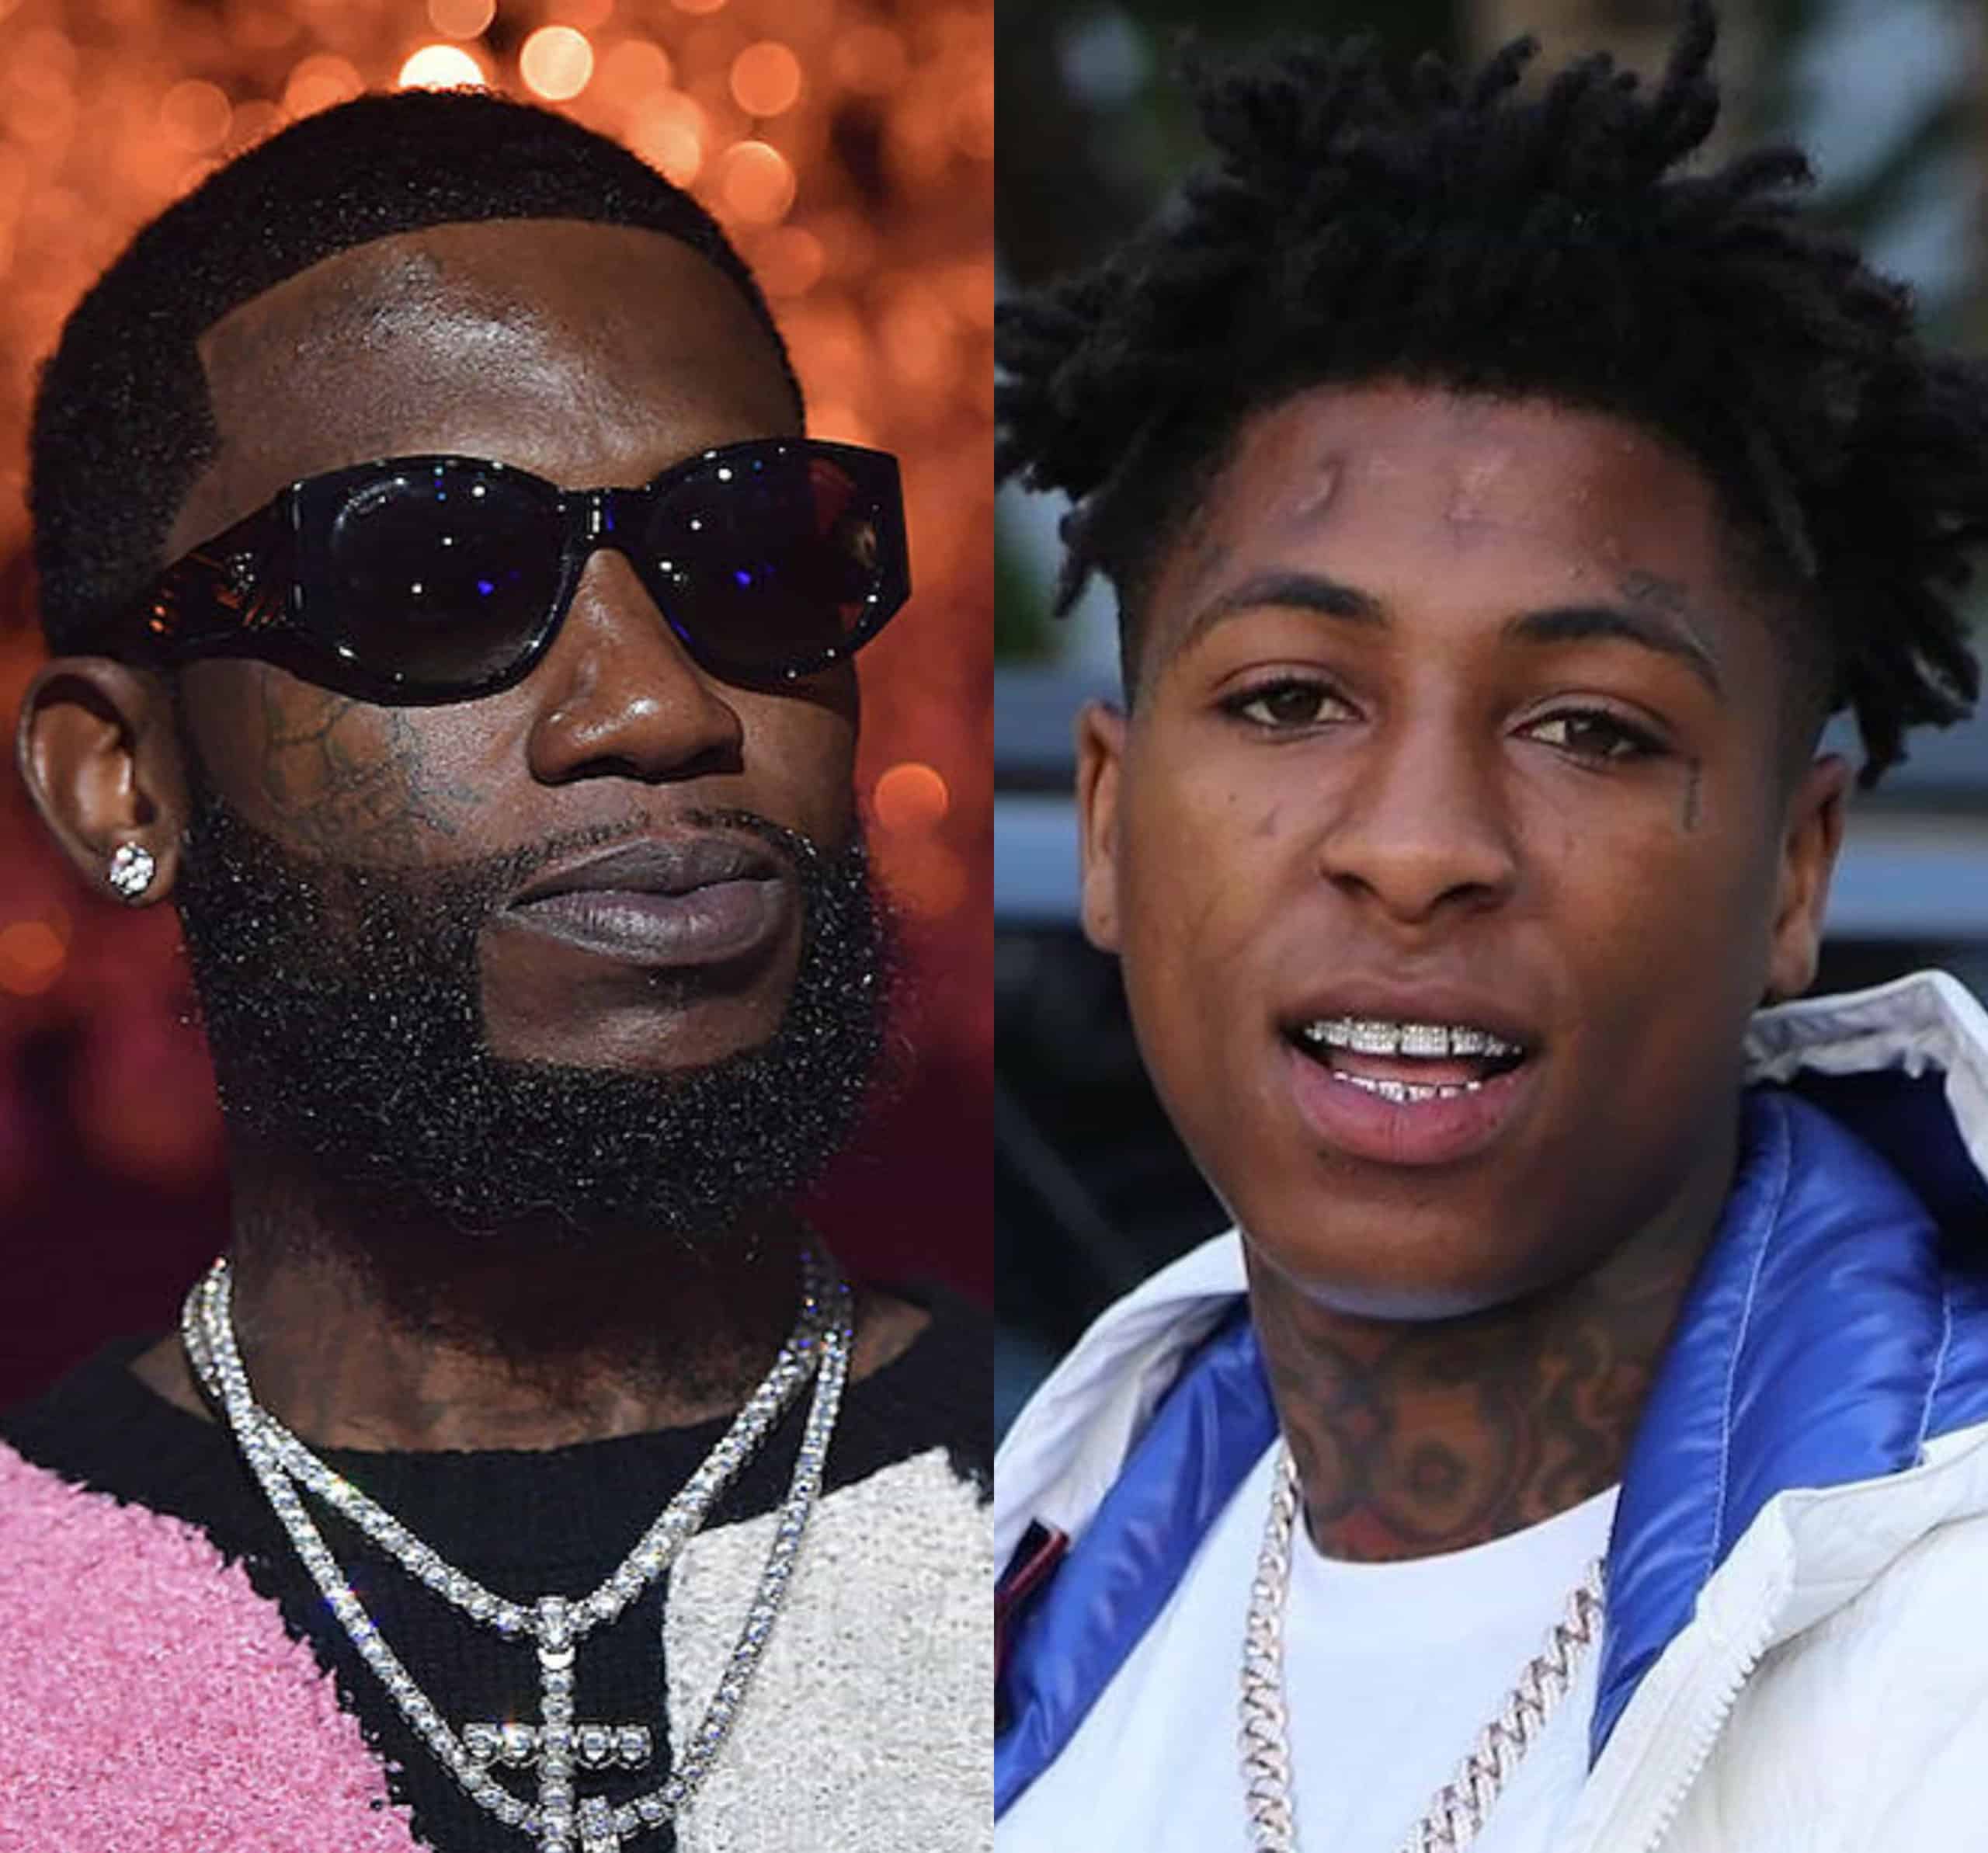 Gucci Mane Responds To NBA Youngboy's Shots With New Diss Track 